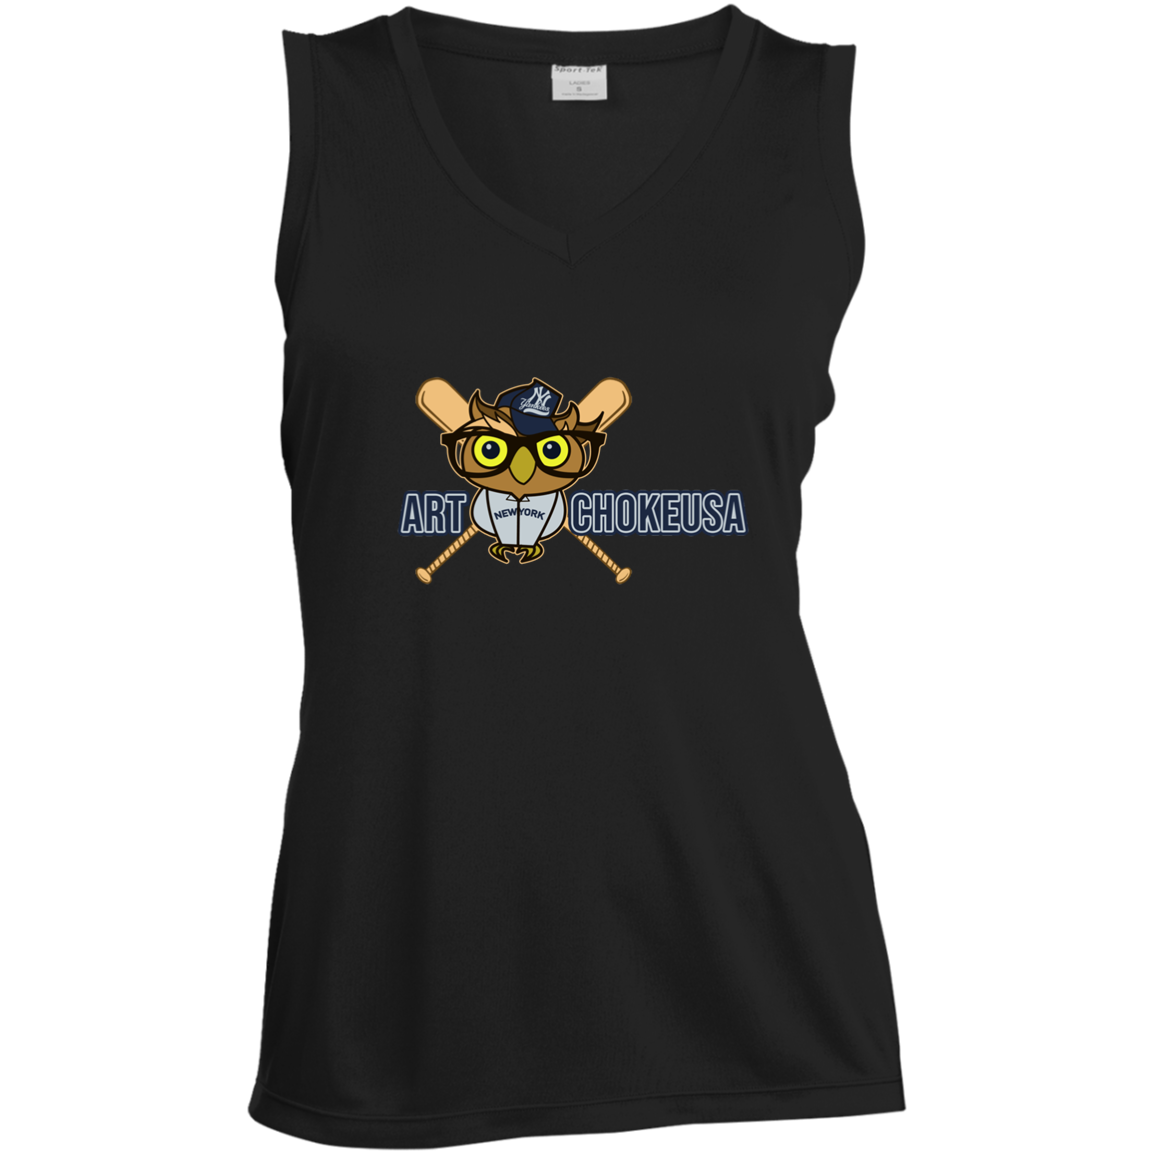 ArtichokeUSA Character and Font design. New York Owl. NY Yankees Fan Art. Let's Create Your Own Team Design Today. Ladies' Sleeveless V-Neck